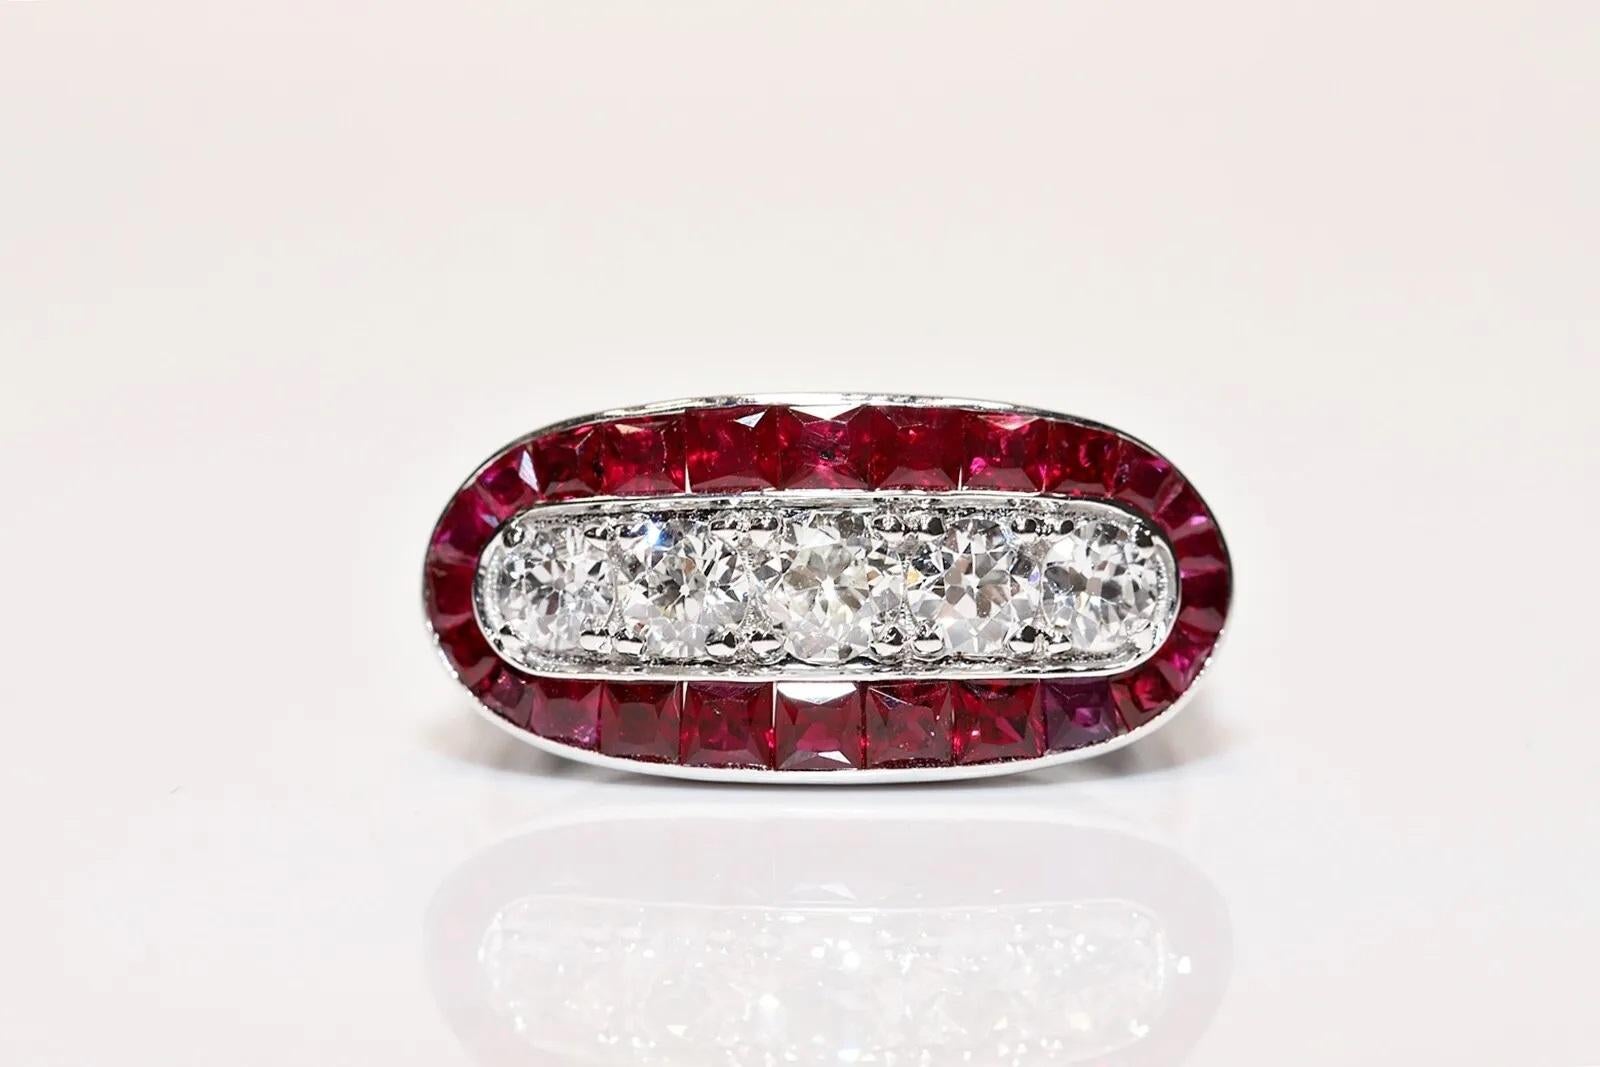 In very good condition.
Total weight is 5.8 grams.
Totally  is diamond 0.94 carat.
The diamond is has G-H color and vvs-vs-s1 clarity.
Totally is caliber ruby 1.80 carat.
Ring size is US 6.5 (We offer free resizing)
We can make any size.
Box is not